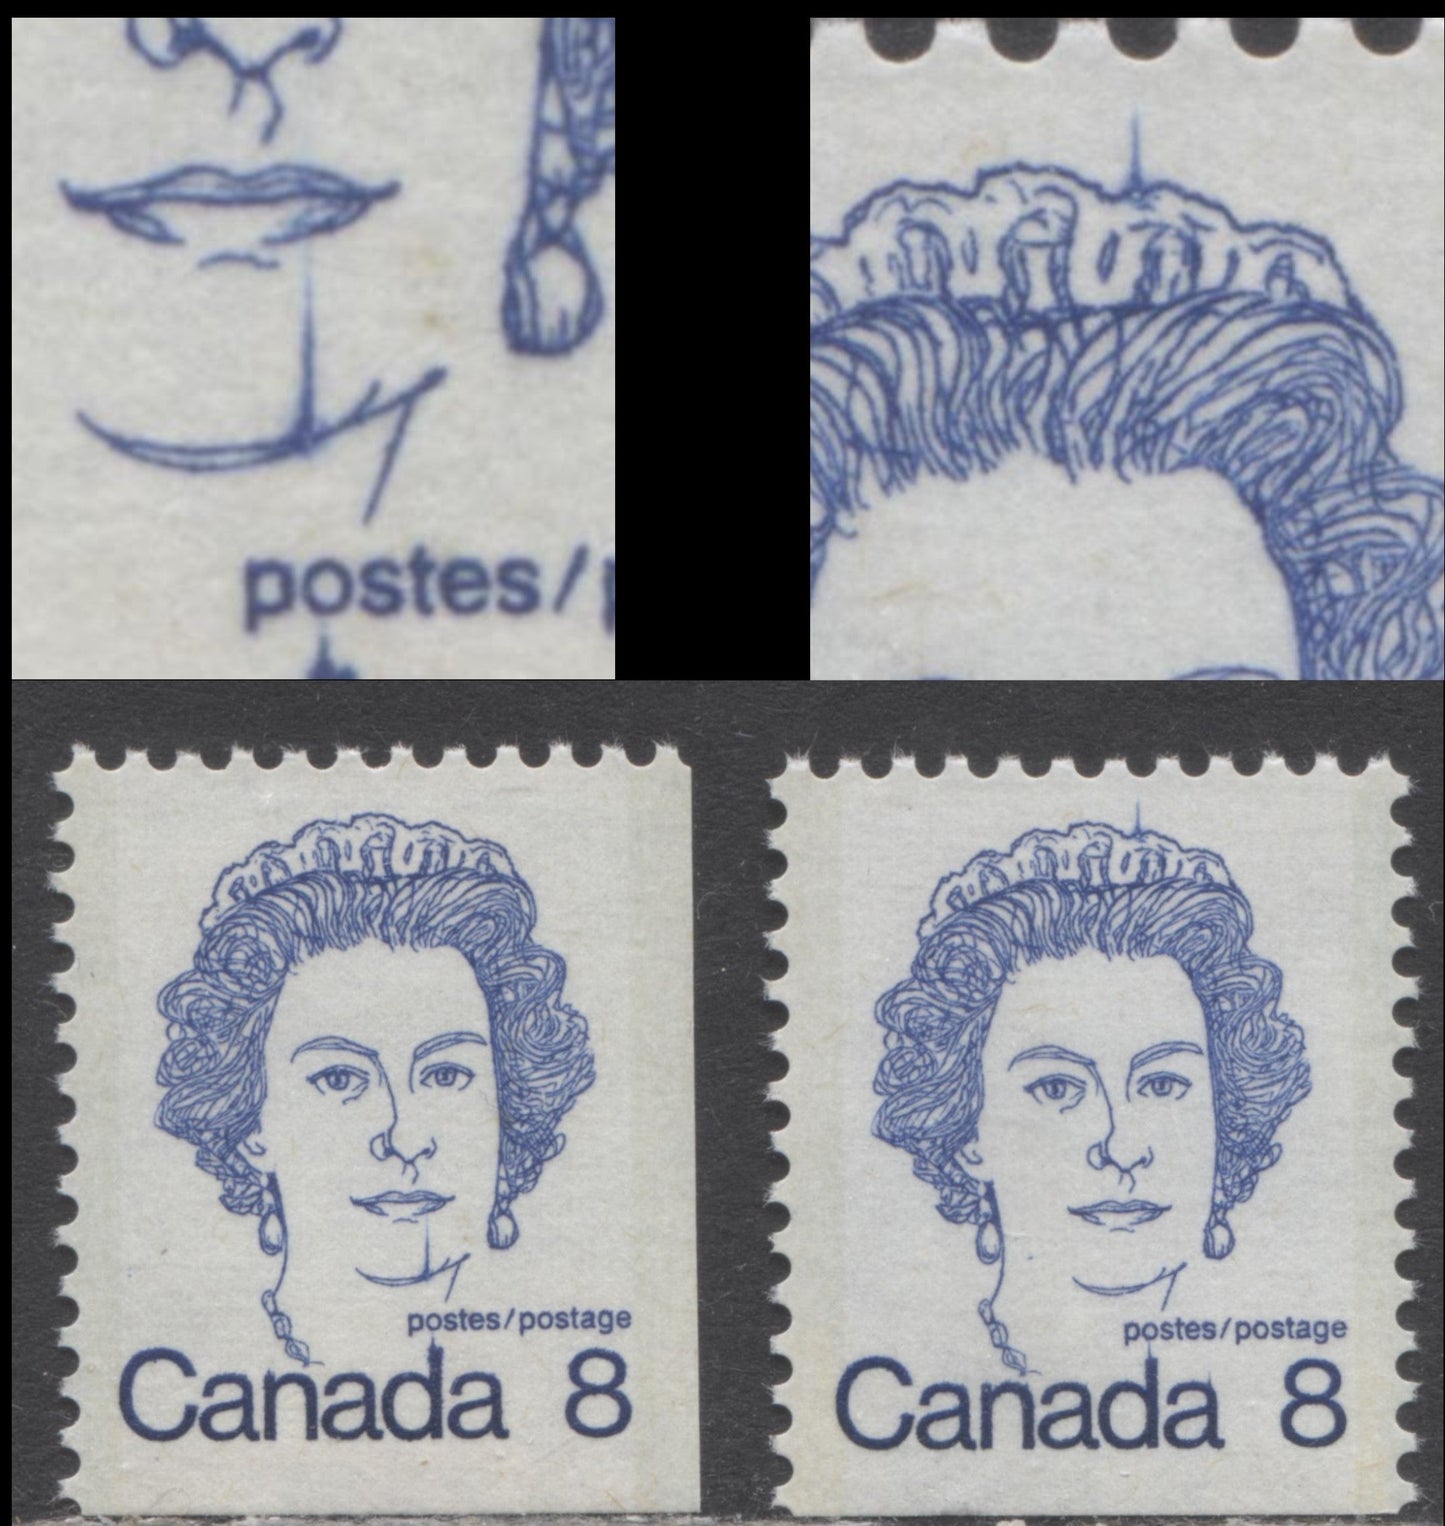 Lot 329 Canada #593xxvi 8c Royal Blue Queen Elizabeth II, 1973 - 1976 Caricature Issue, 2 VFNH Booklet Singles On MF Paper With Unlisted Line From Crown And Scar On Face Varieties